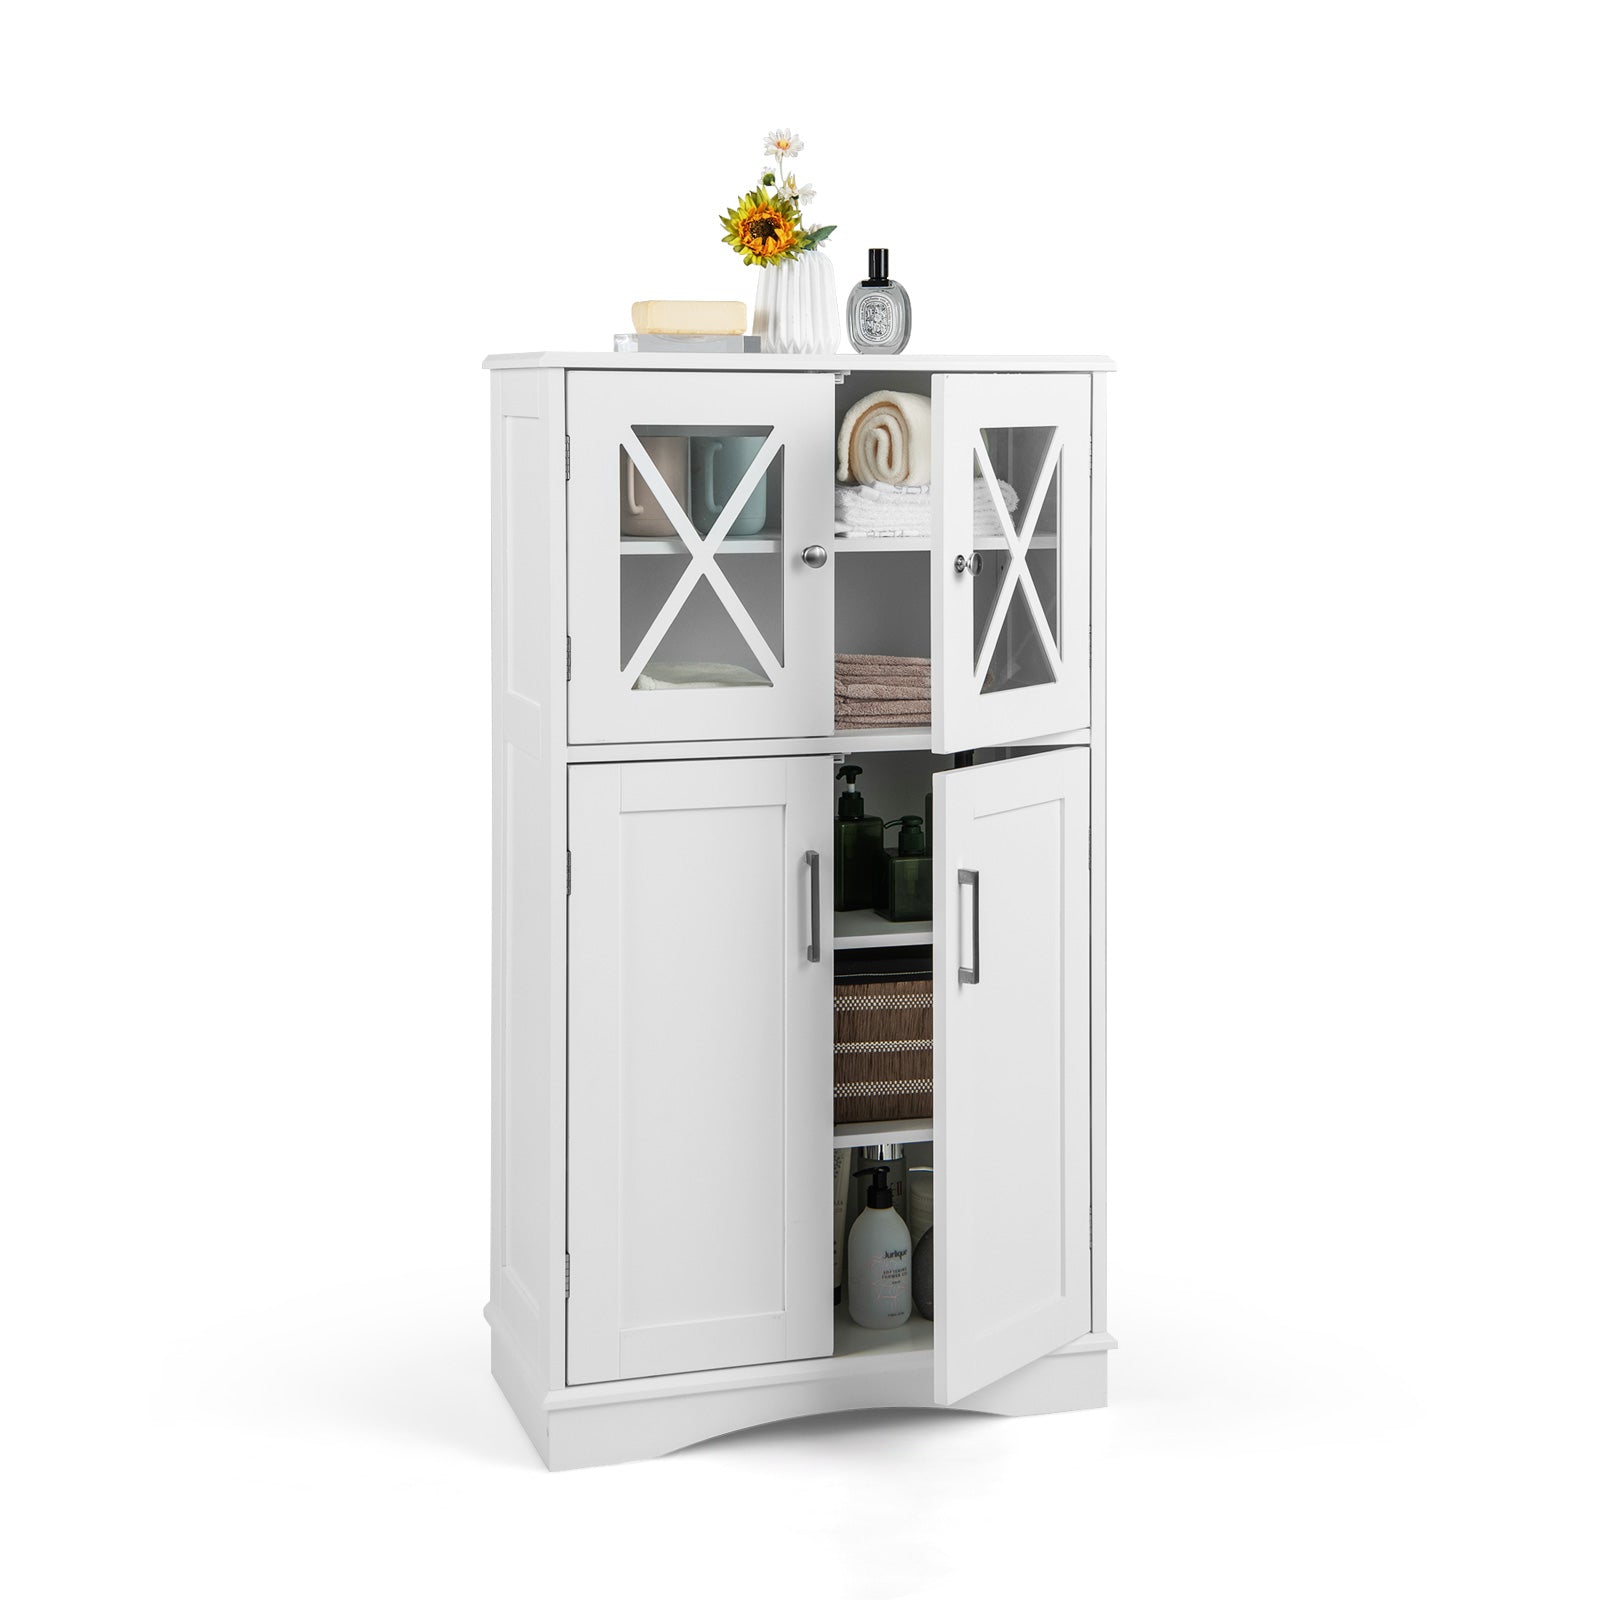 Bathroom Linen Storage Cabinet with Doors and Adjustable Shelves-White